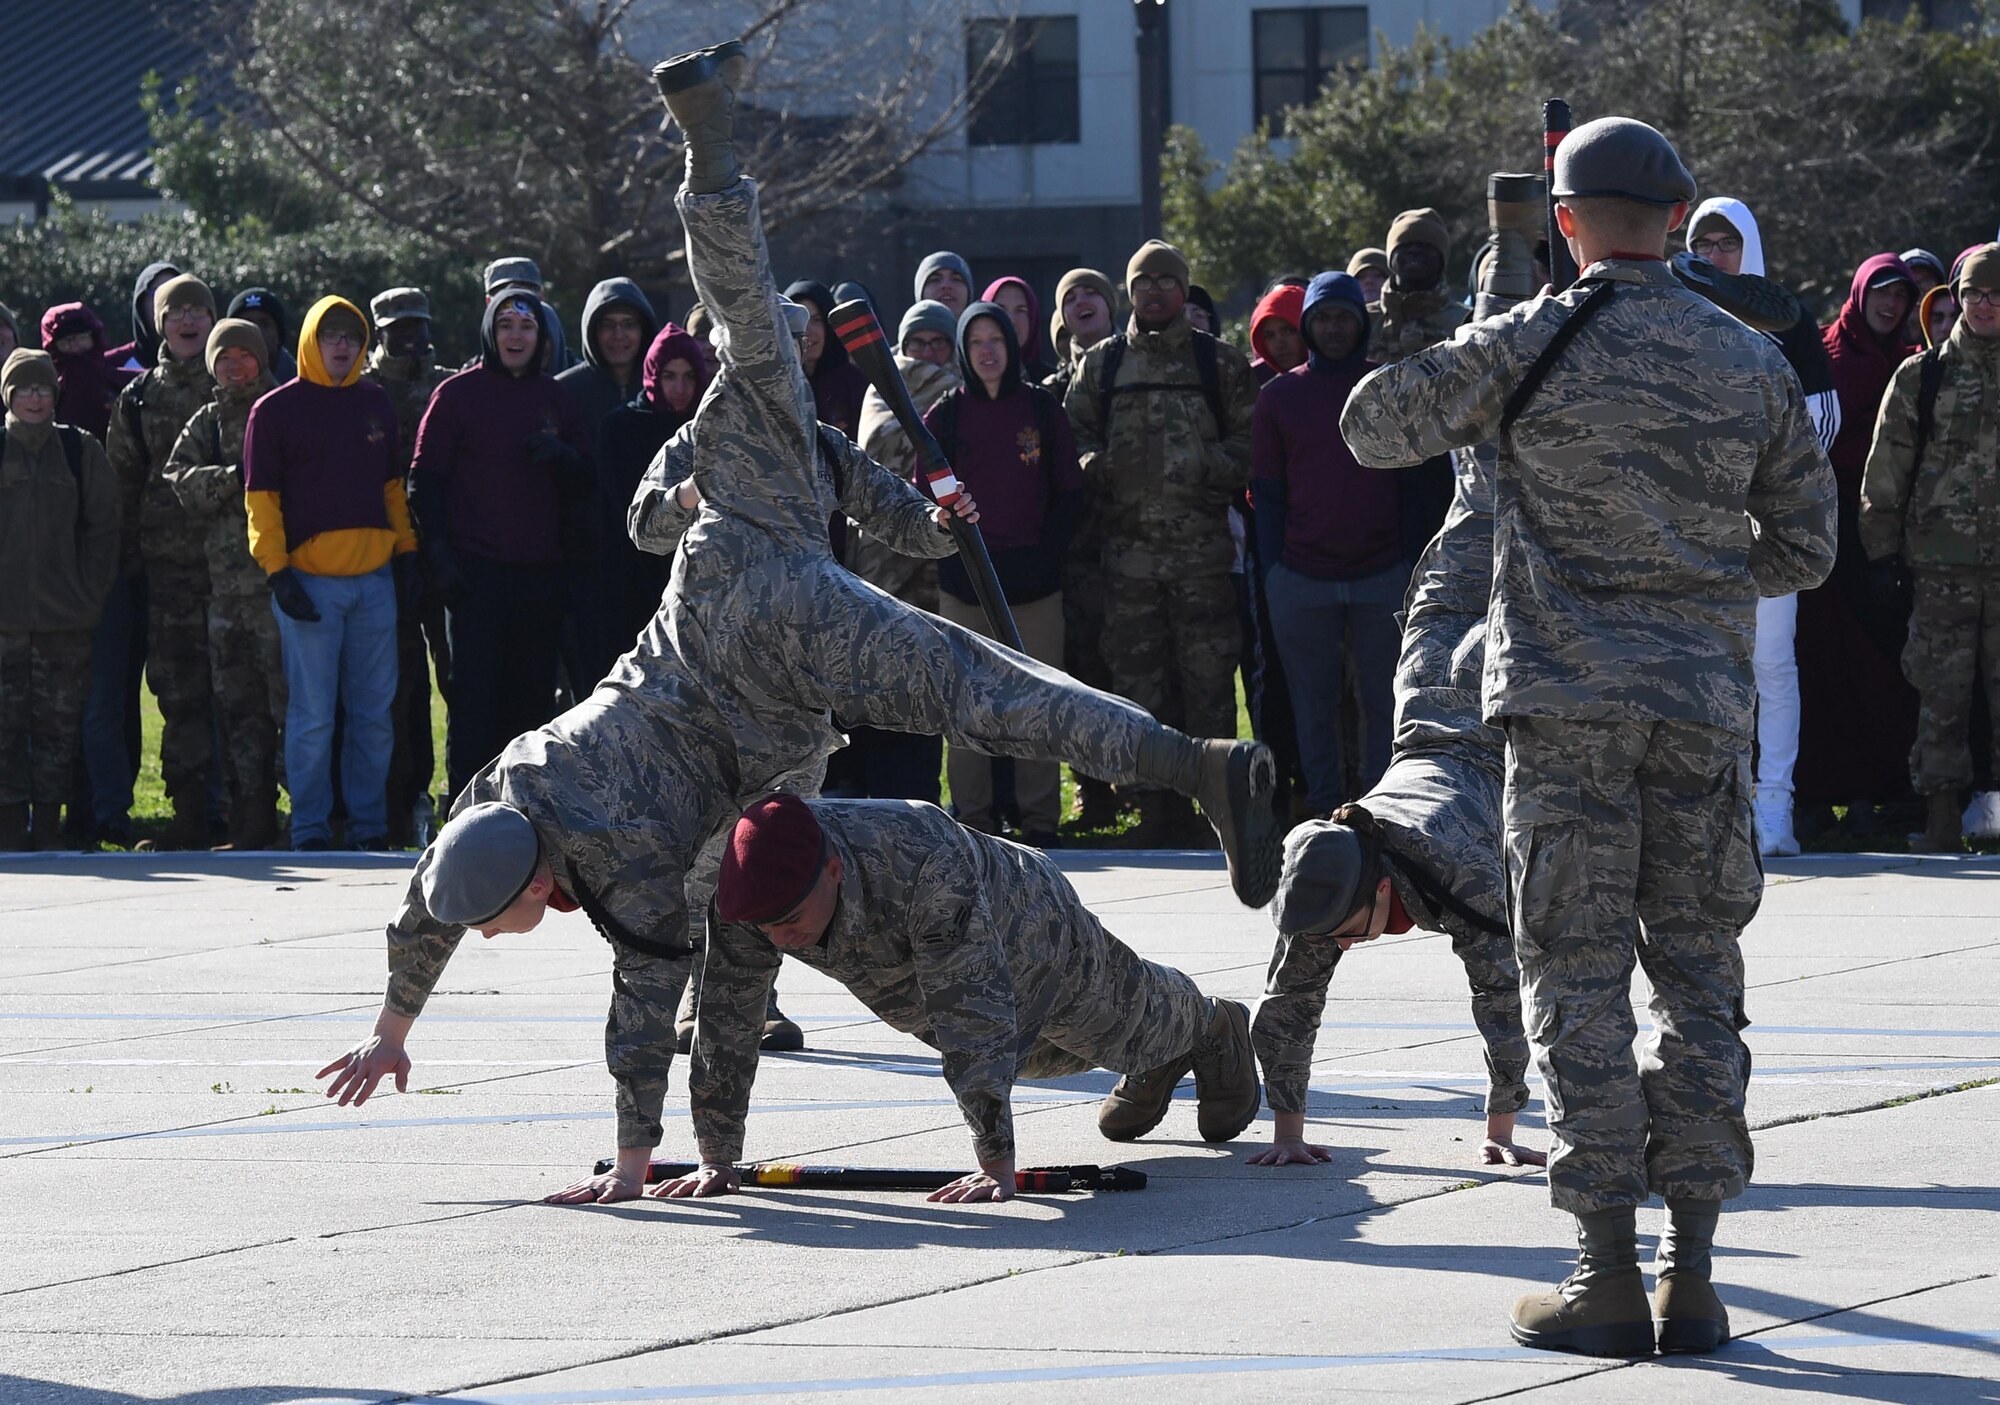 Members of the 335th Training Squadron freestyle drill team perform during the 81st Training Group drill down on the Levitow Training Support Facility drill pad at Keesler Air Force Base, Mississippi, Feb. 21, 2020. Airmen from the 81st TRG competed in a quarterly open ranks inspection, regulation drill routine and freestyle drill routine. Keesler trains more than 30,000 students each year. While in training, Airmen are given the opportunity to volunteer to learn and execute drill down routines. (U.S. Air Force photo by Kemberly Groue)